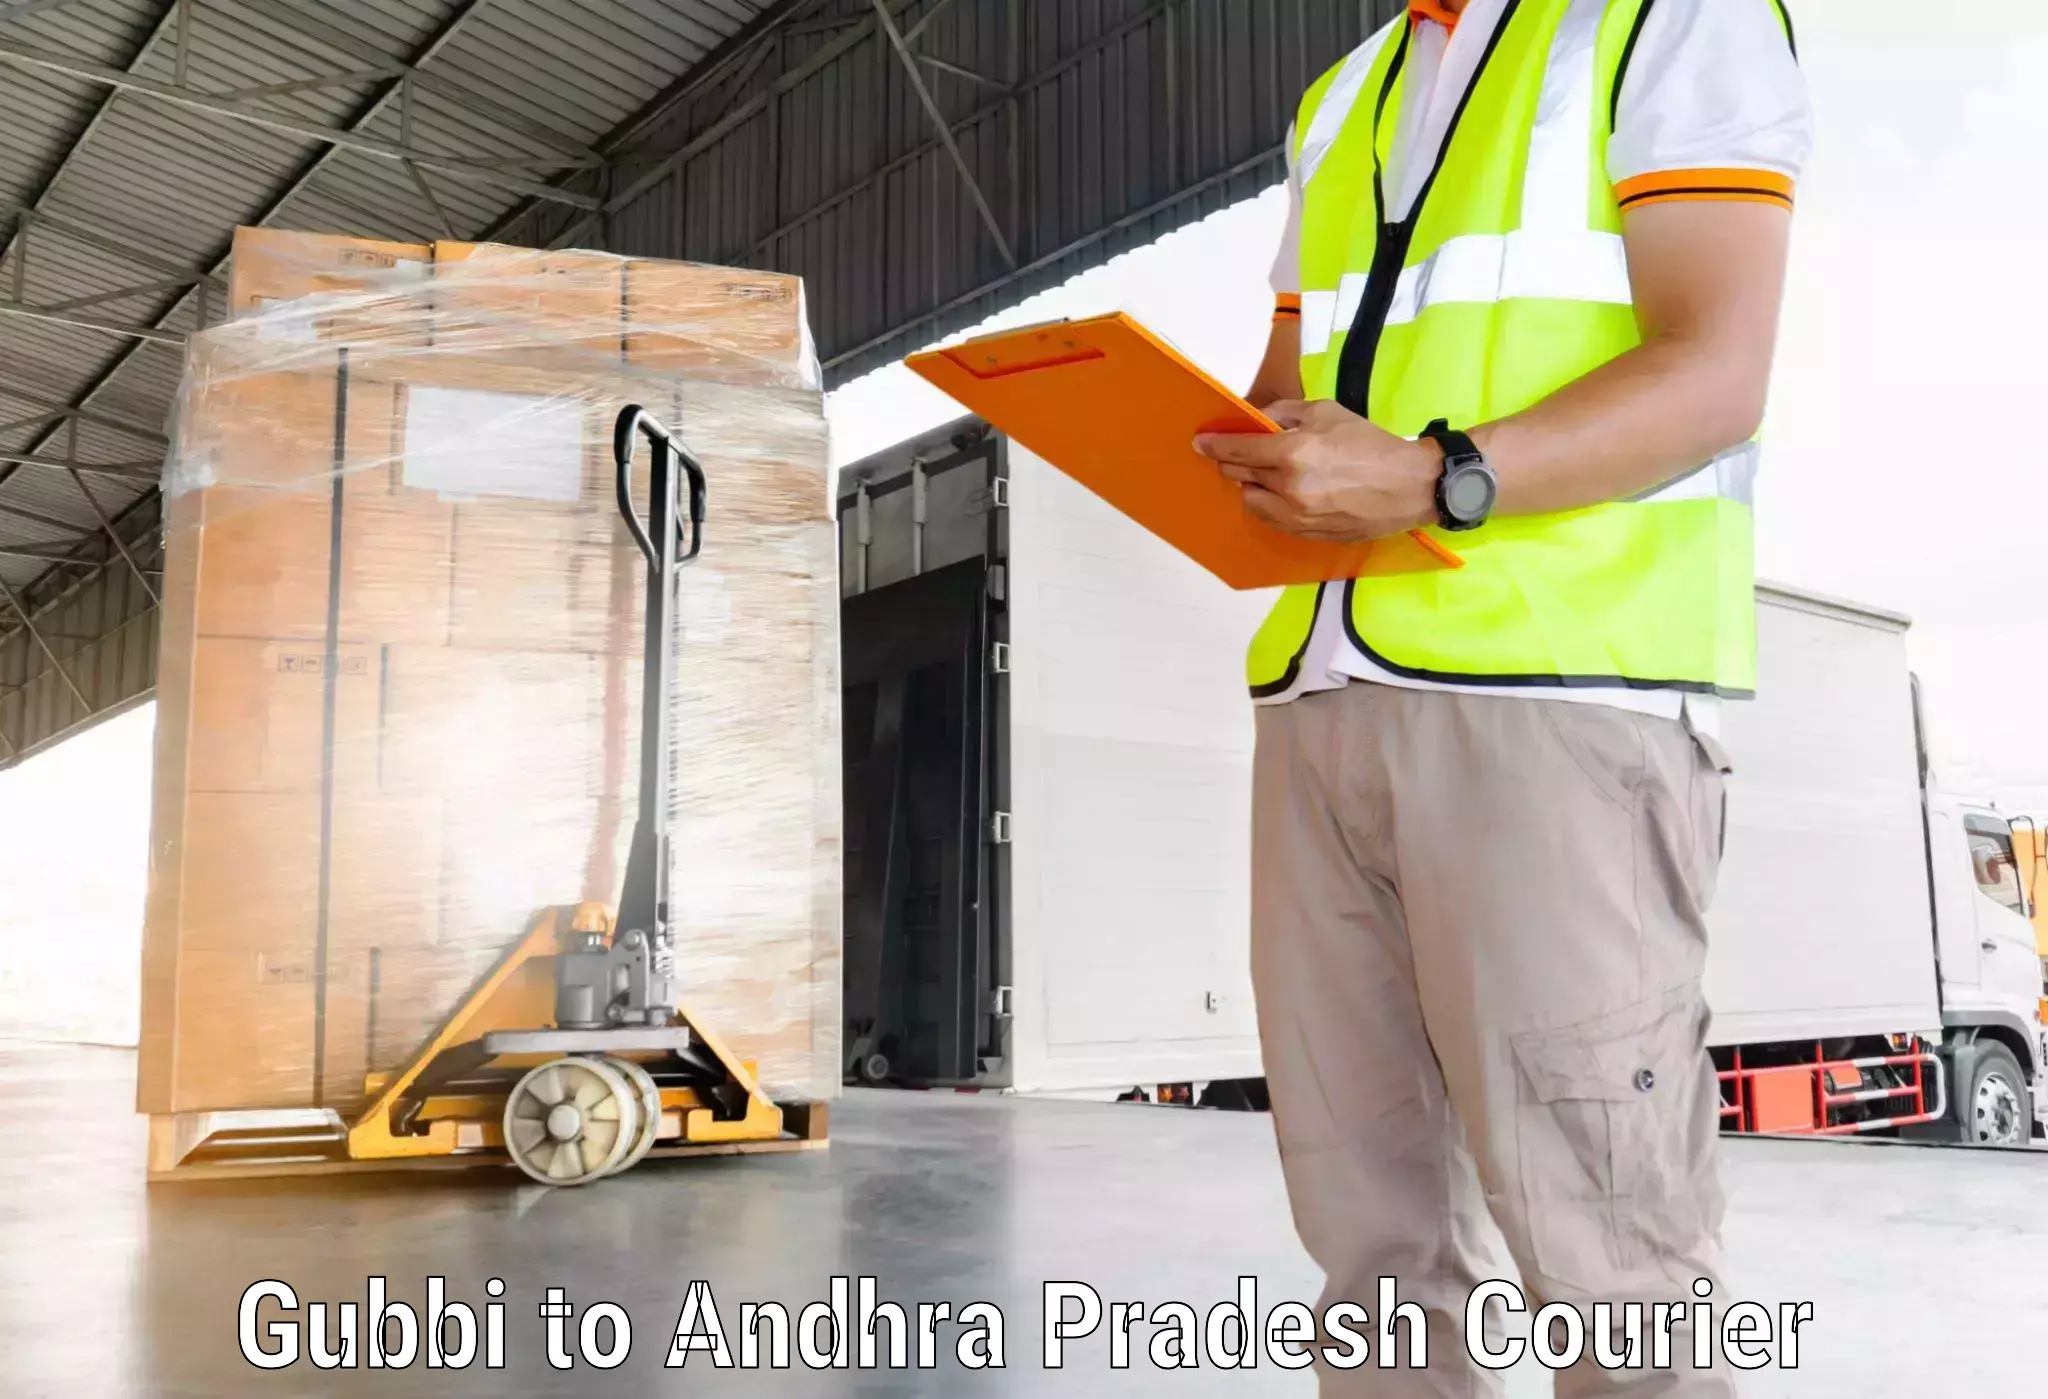 Express delivery capabilities in Gubbi to Cuddapah